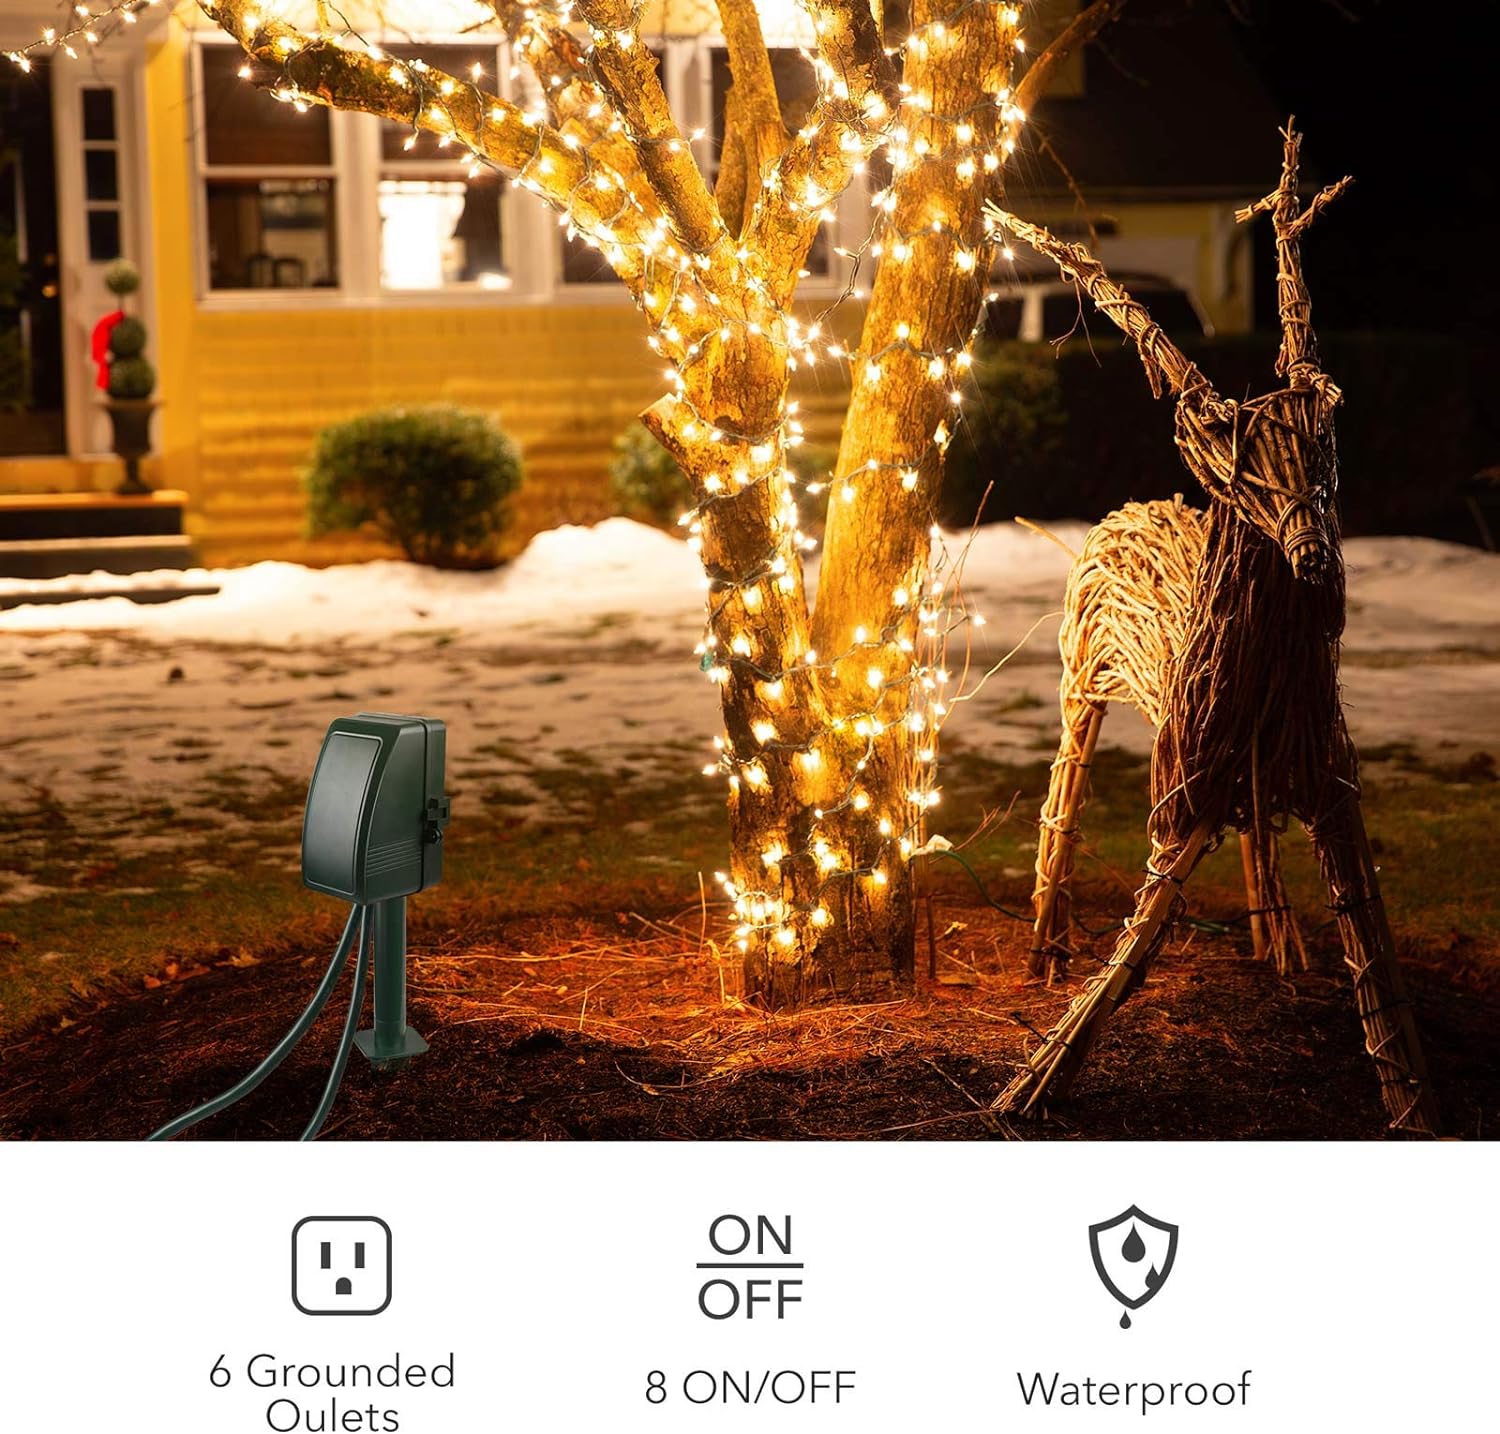 BN-Link 7 Day Heavy Duty Outdoor Digital Stake Timer, 6 Outlets, Weatherproof, BNC-U3S, Perfect for Outdoor Lights, Sprinklers, Christm